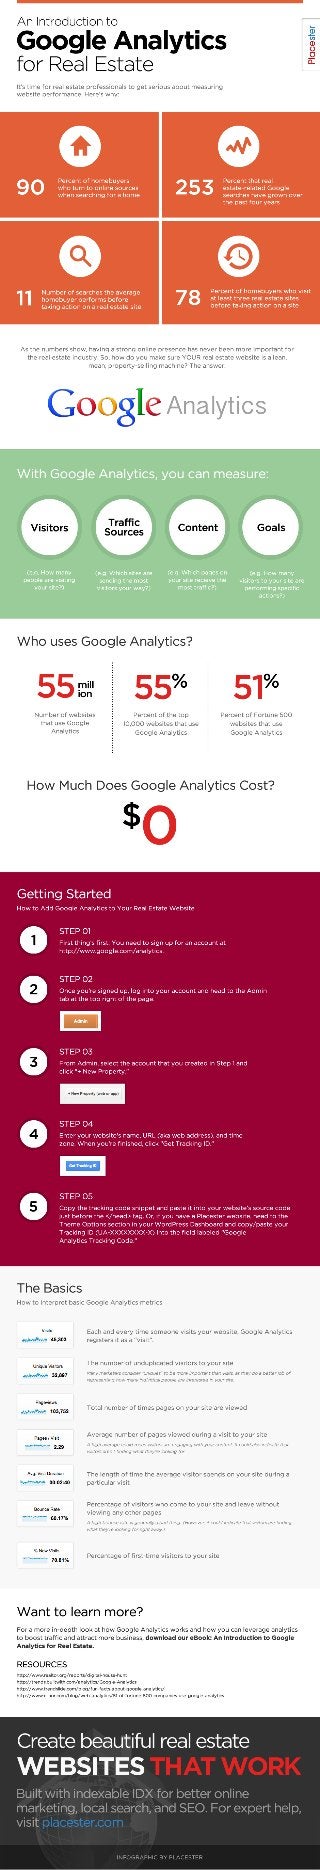 [Infographic] An Introduction to Google Analytics for Real Estate